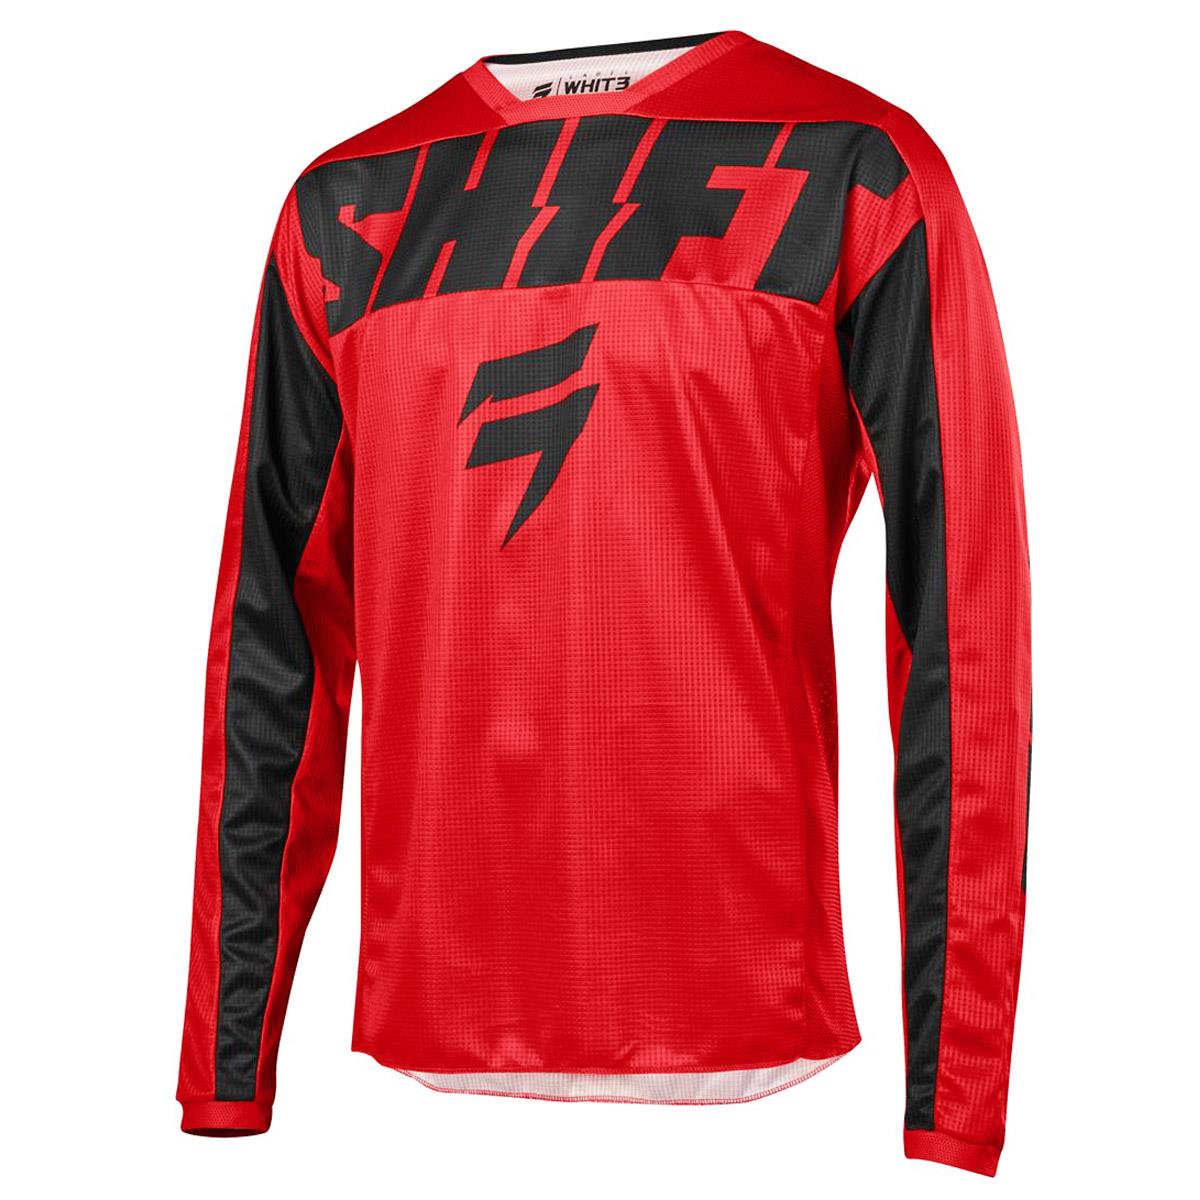 Shift Jersey Whit3 Label York Red